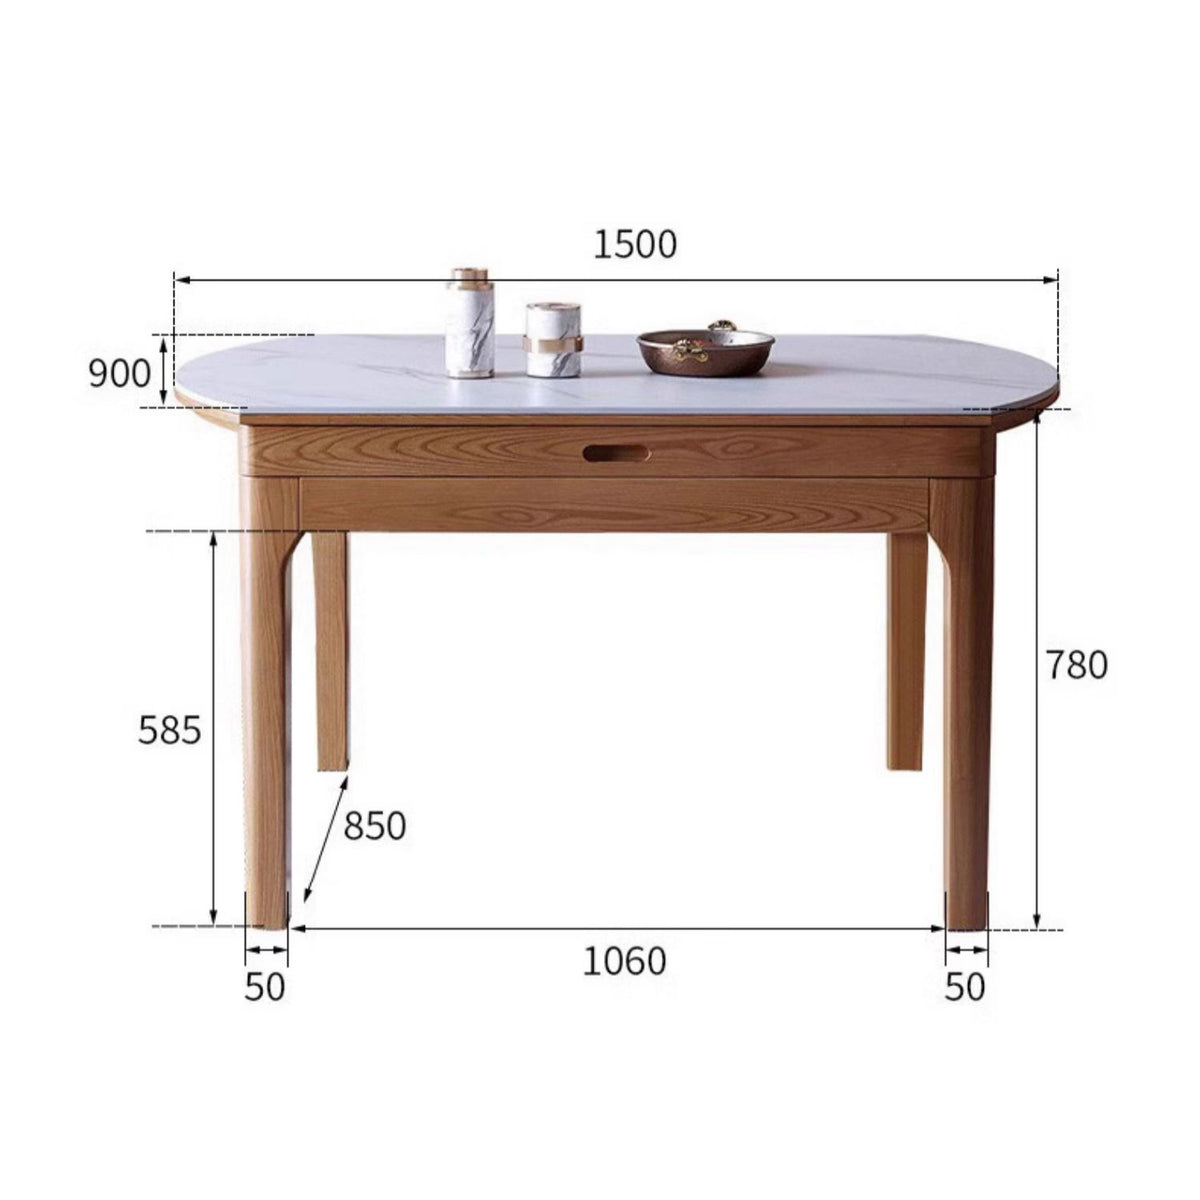 Sleek Brown Frame Table with Natural Sintered Stone & Ash Wood Finish fmbs-007